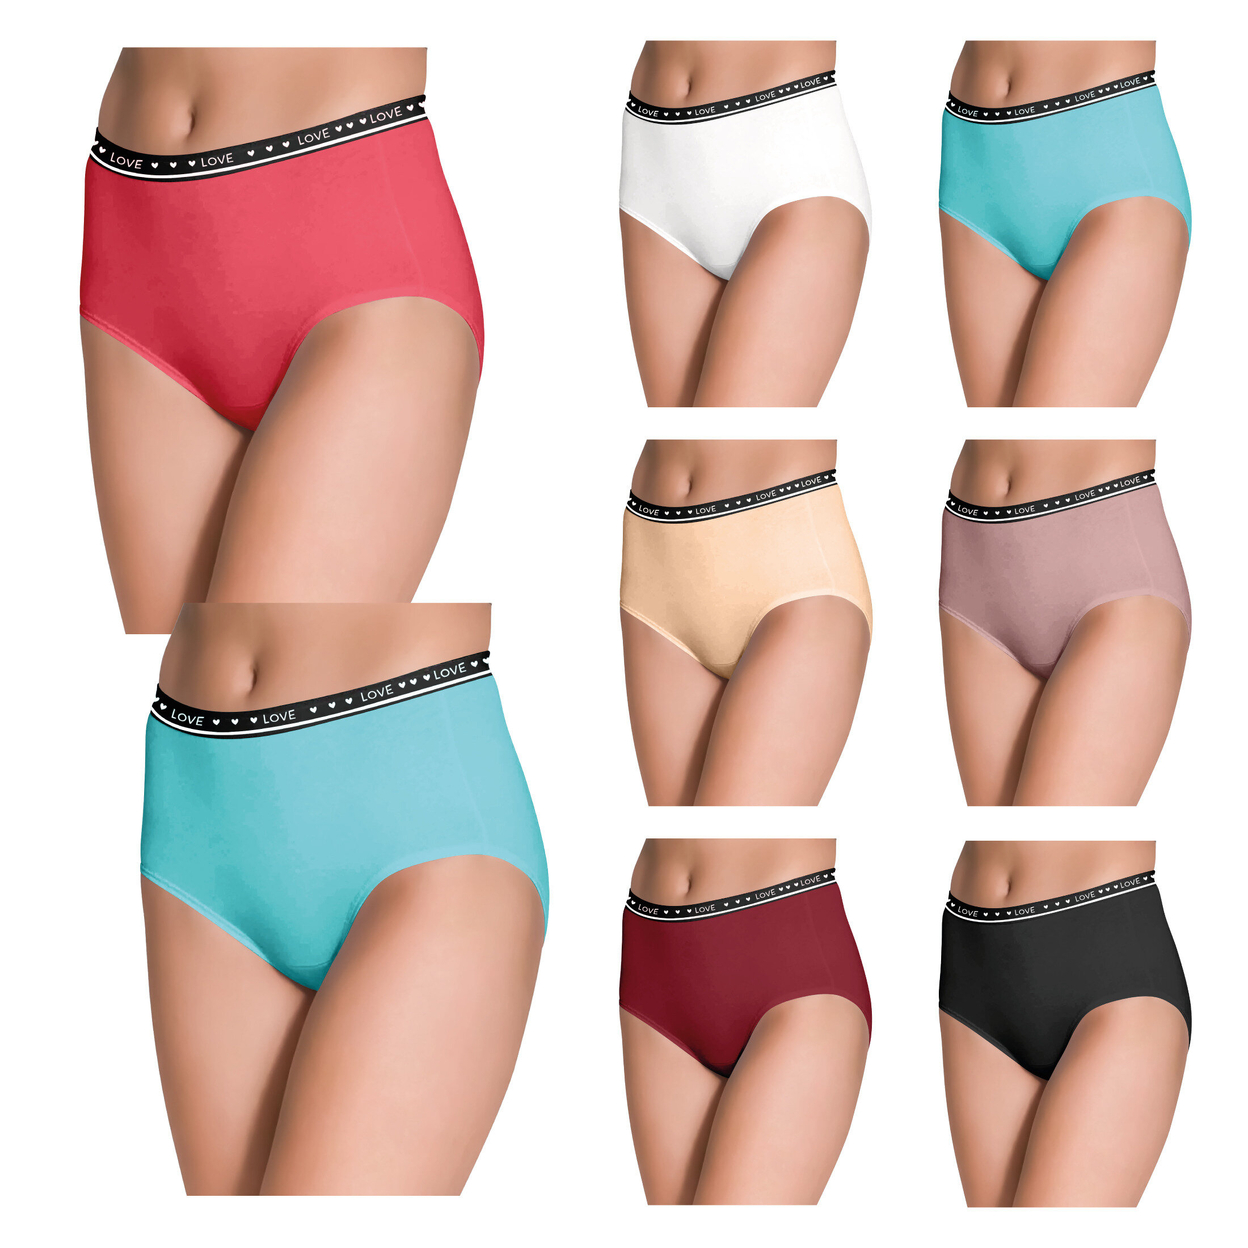 Multi-Pack: Women's Ultra Soft Moisture Wicking Panties Cotton Perfect Fit Underwear (Plus Sizes Available) - 12-Pack, X-large